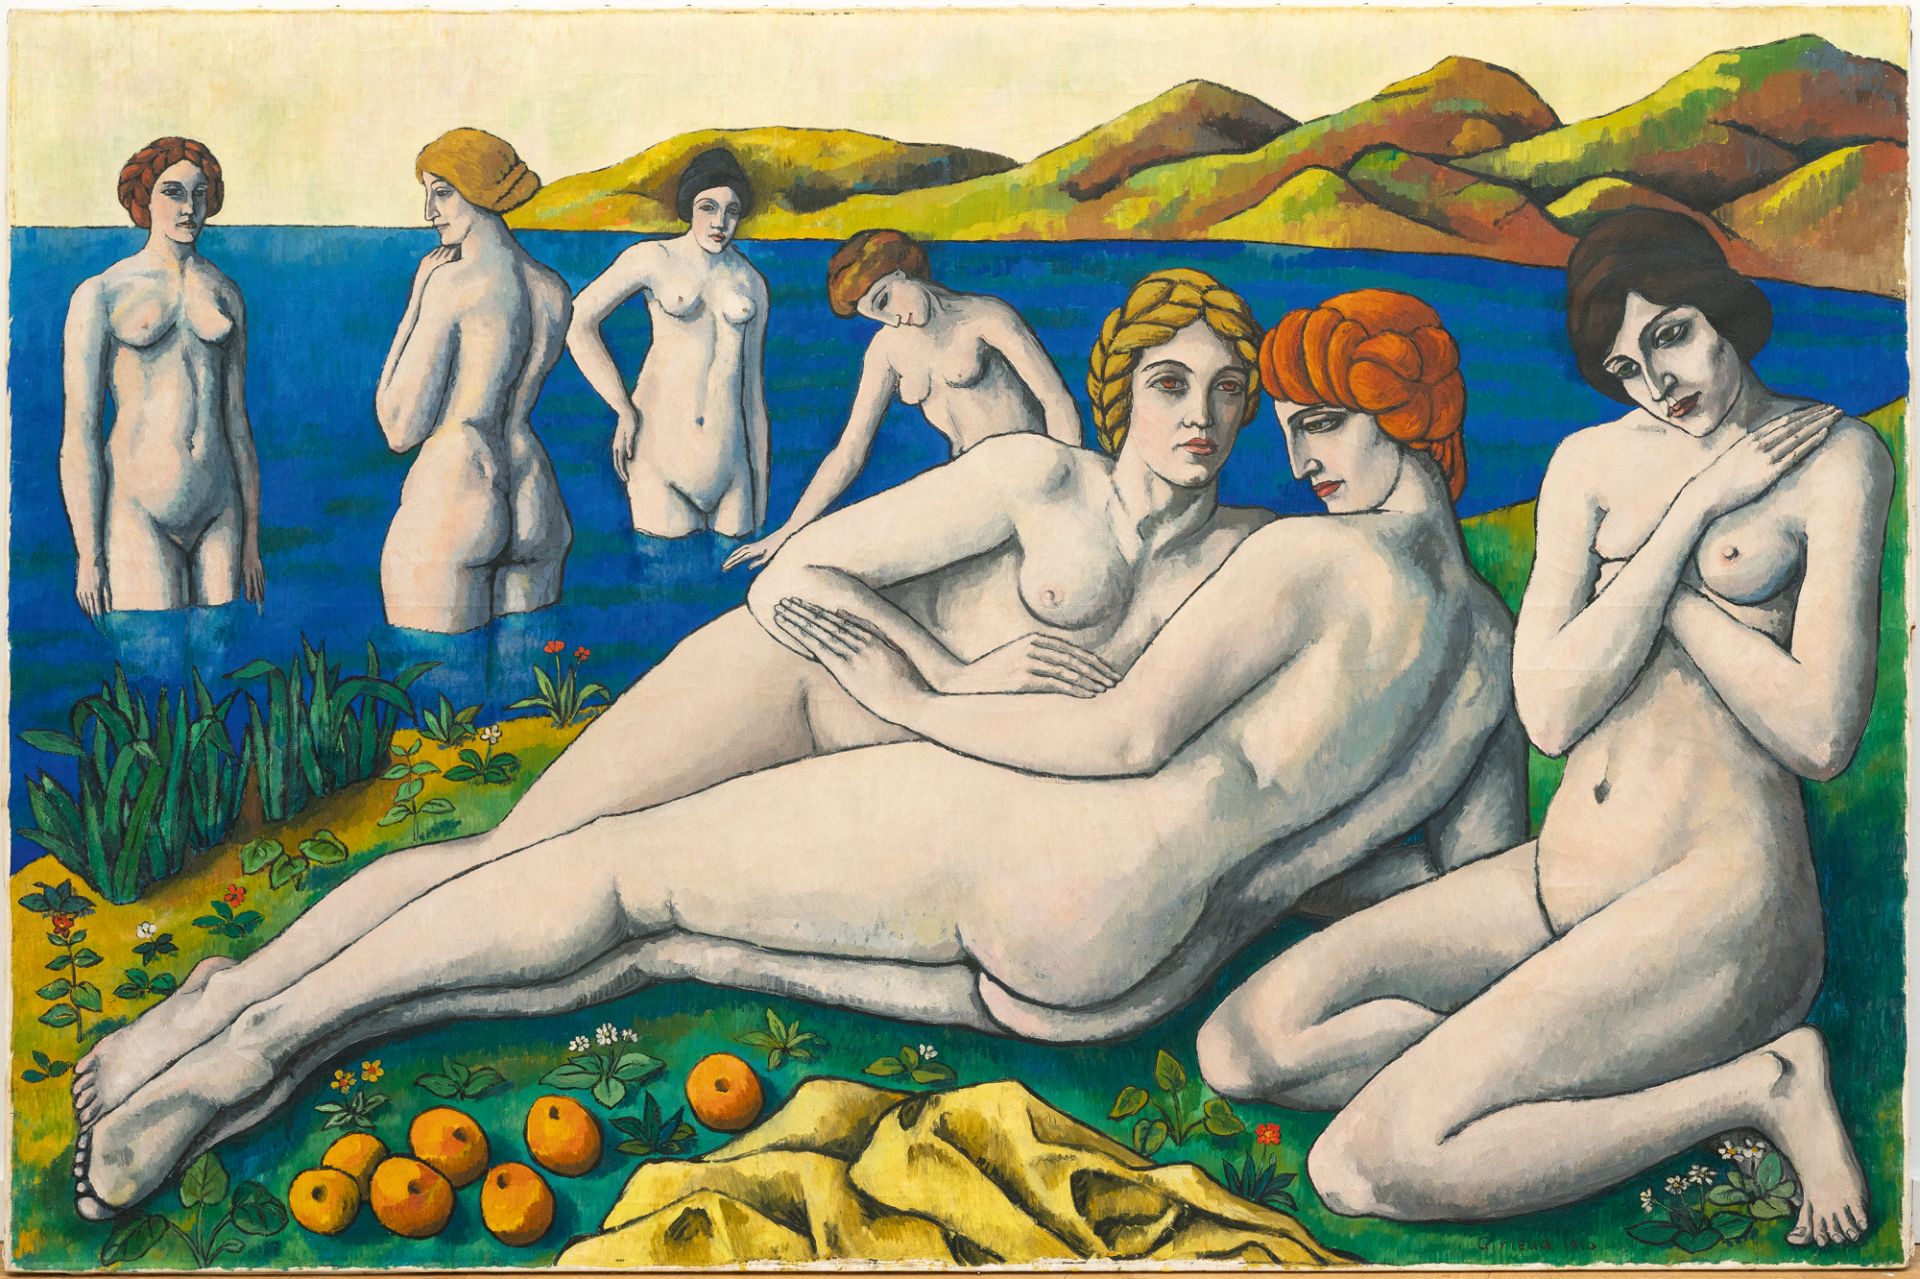 Pierre-Paul Girieud, Grand Lesbos (Baigneuses).Oil on canvas. 1910. Ca. 150 x 225 cm. Signed and - Image 5 of 5